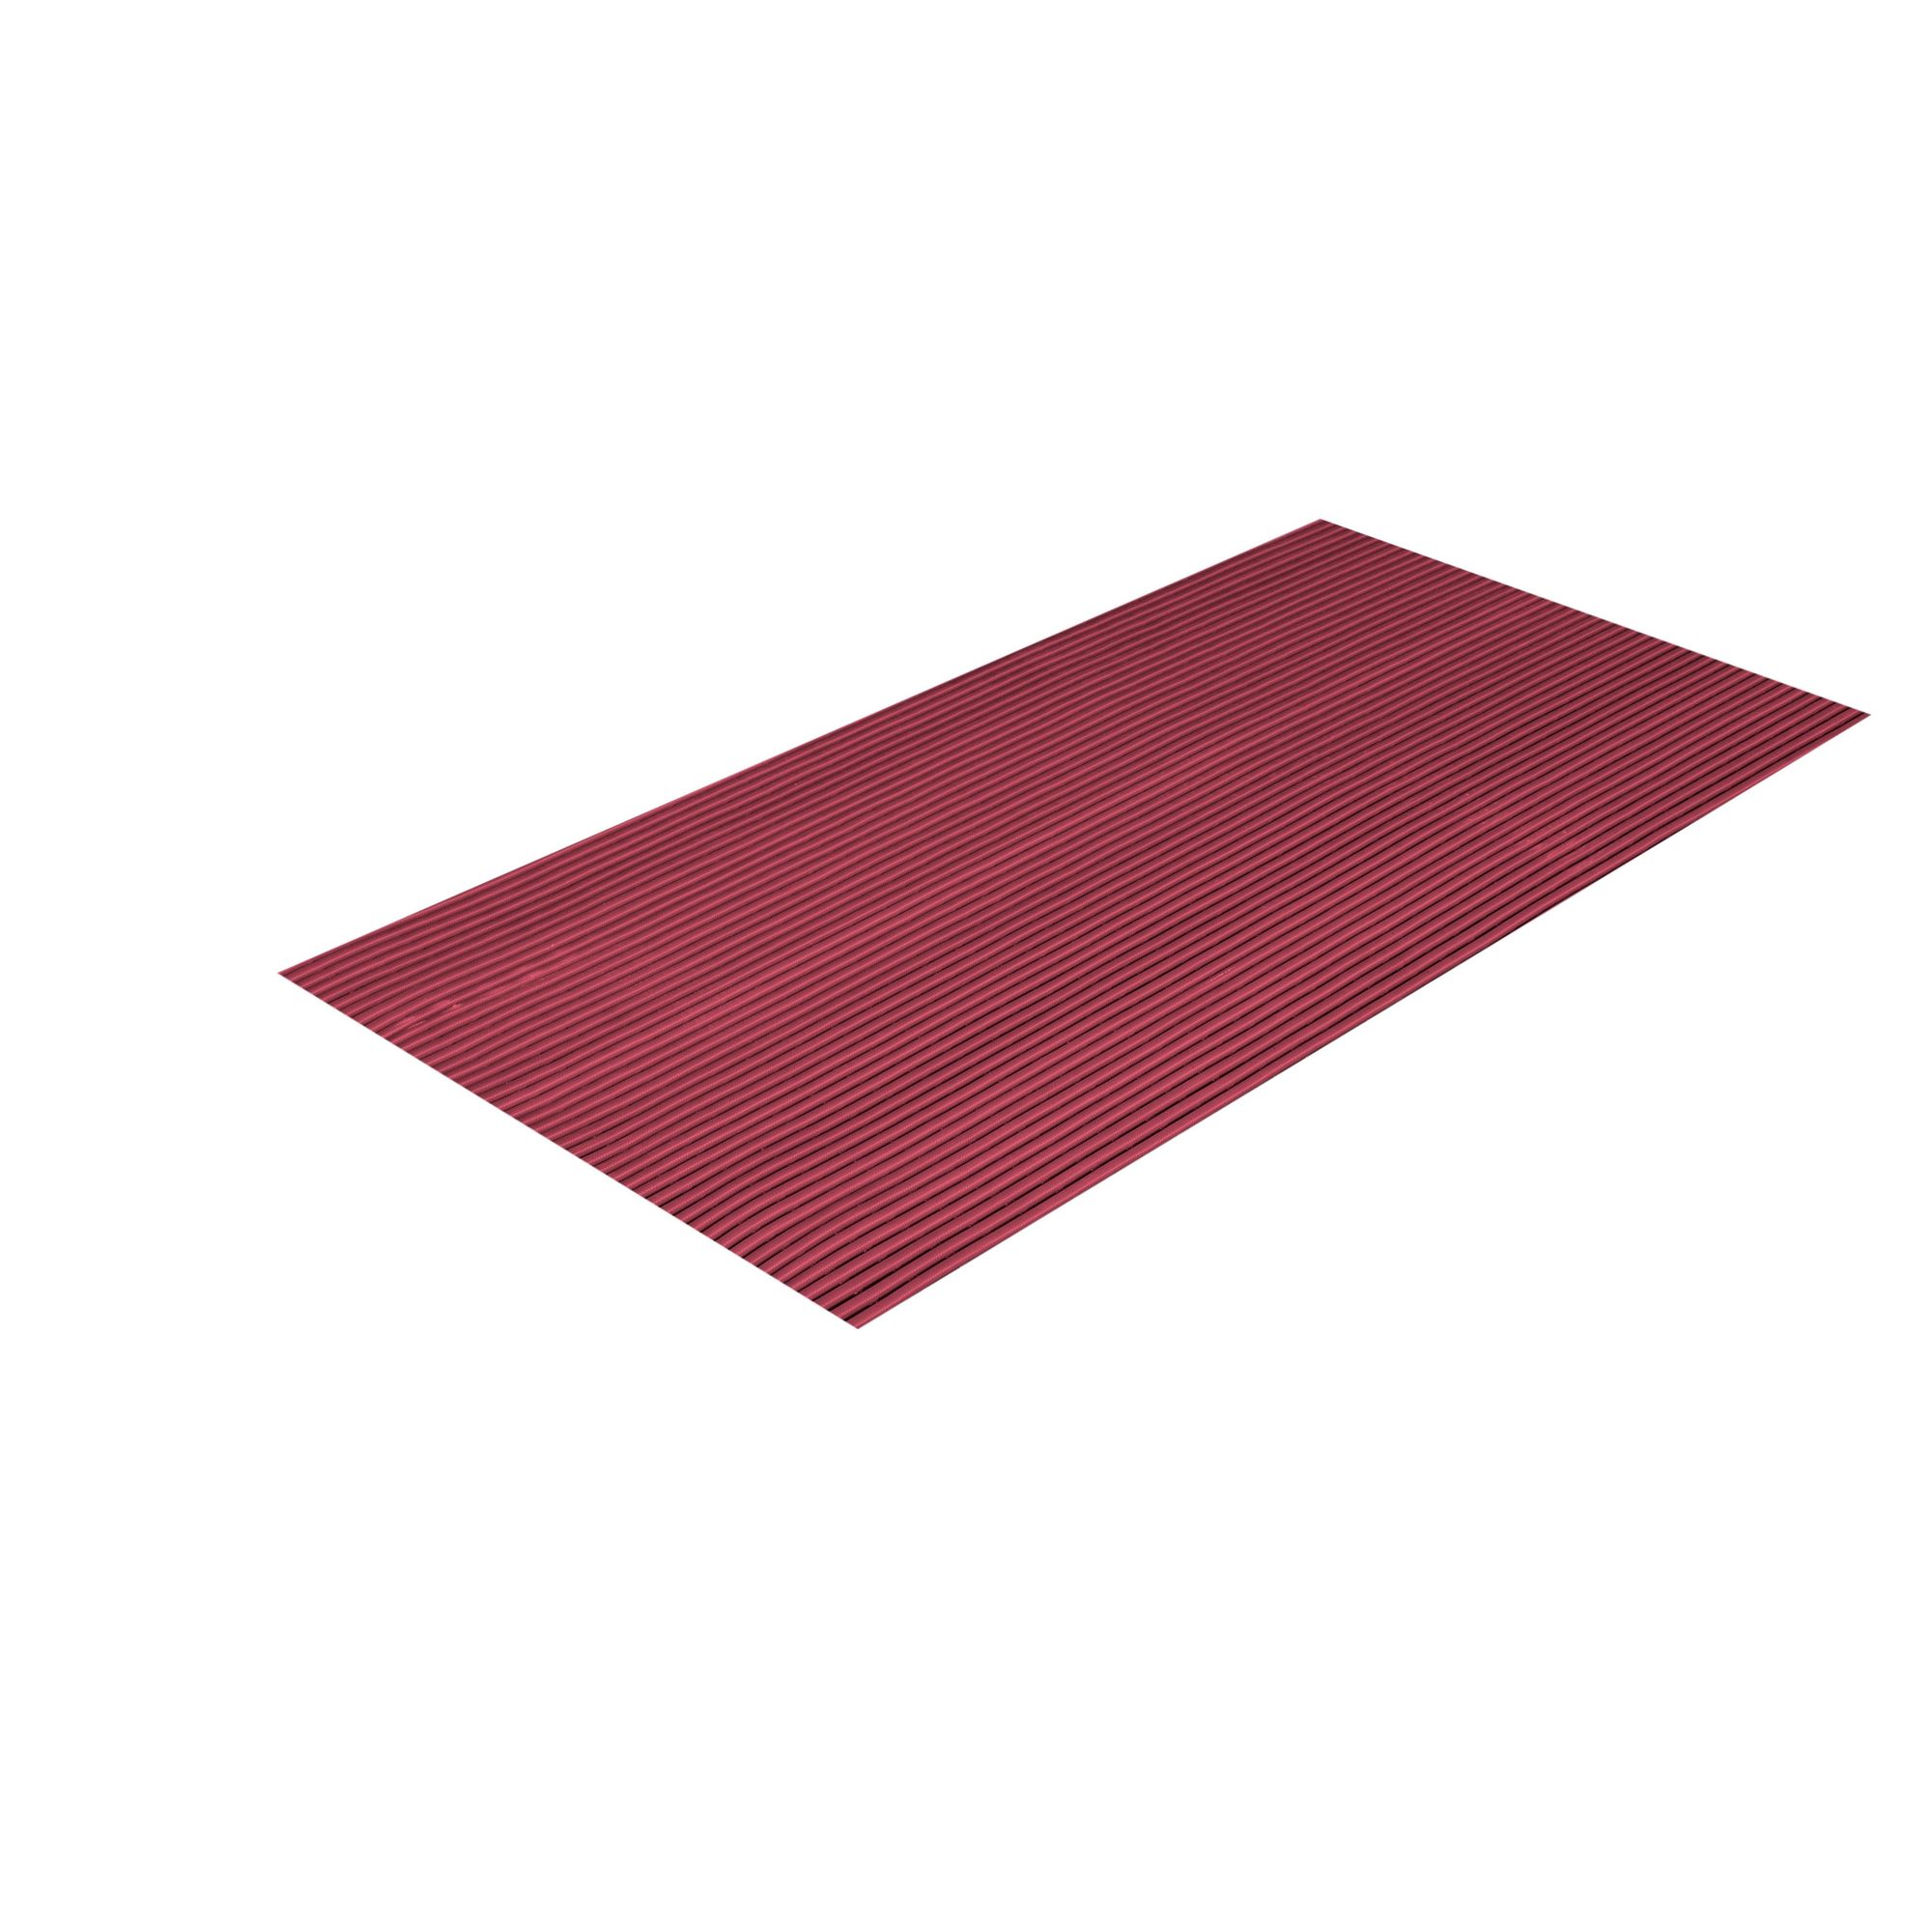 Crown Matting Technologies, Sani-Tred 2ft.x40ft. Mulberry Red, Width 24 in, Length 480 in, Thickness 15/32 in, Model HVR0024MR